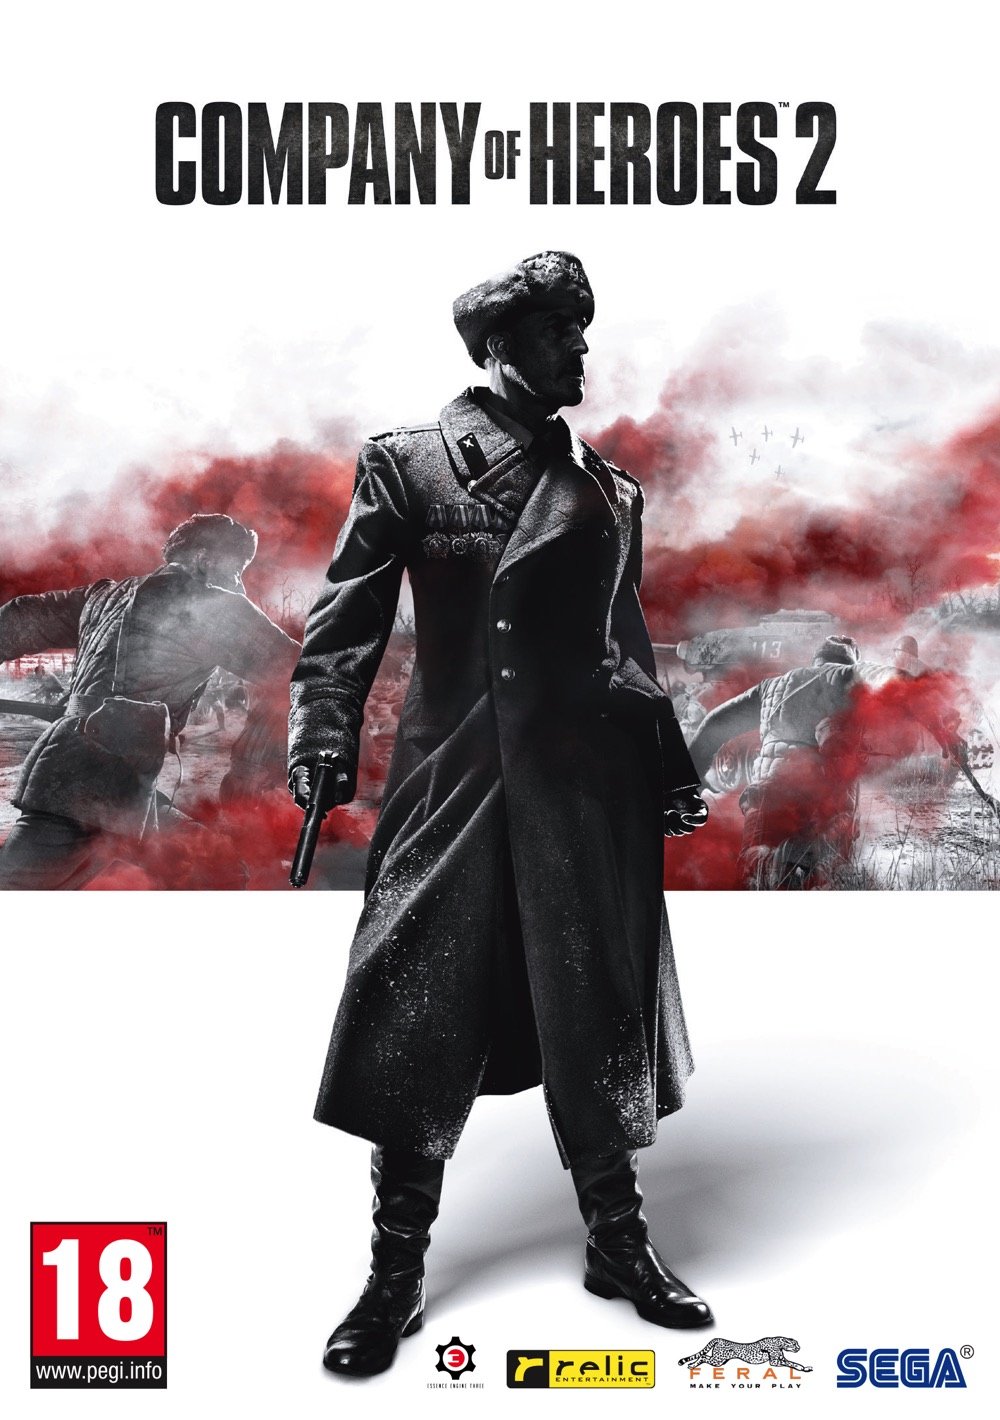 games like company of heroes on steam